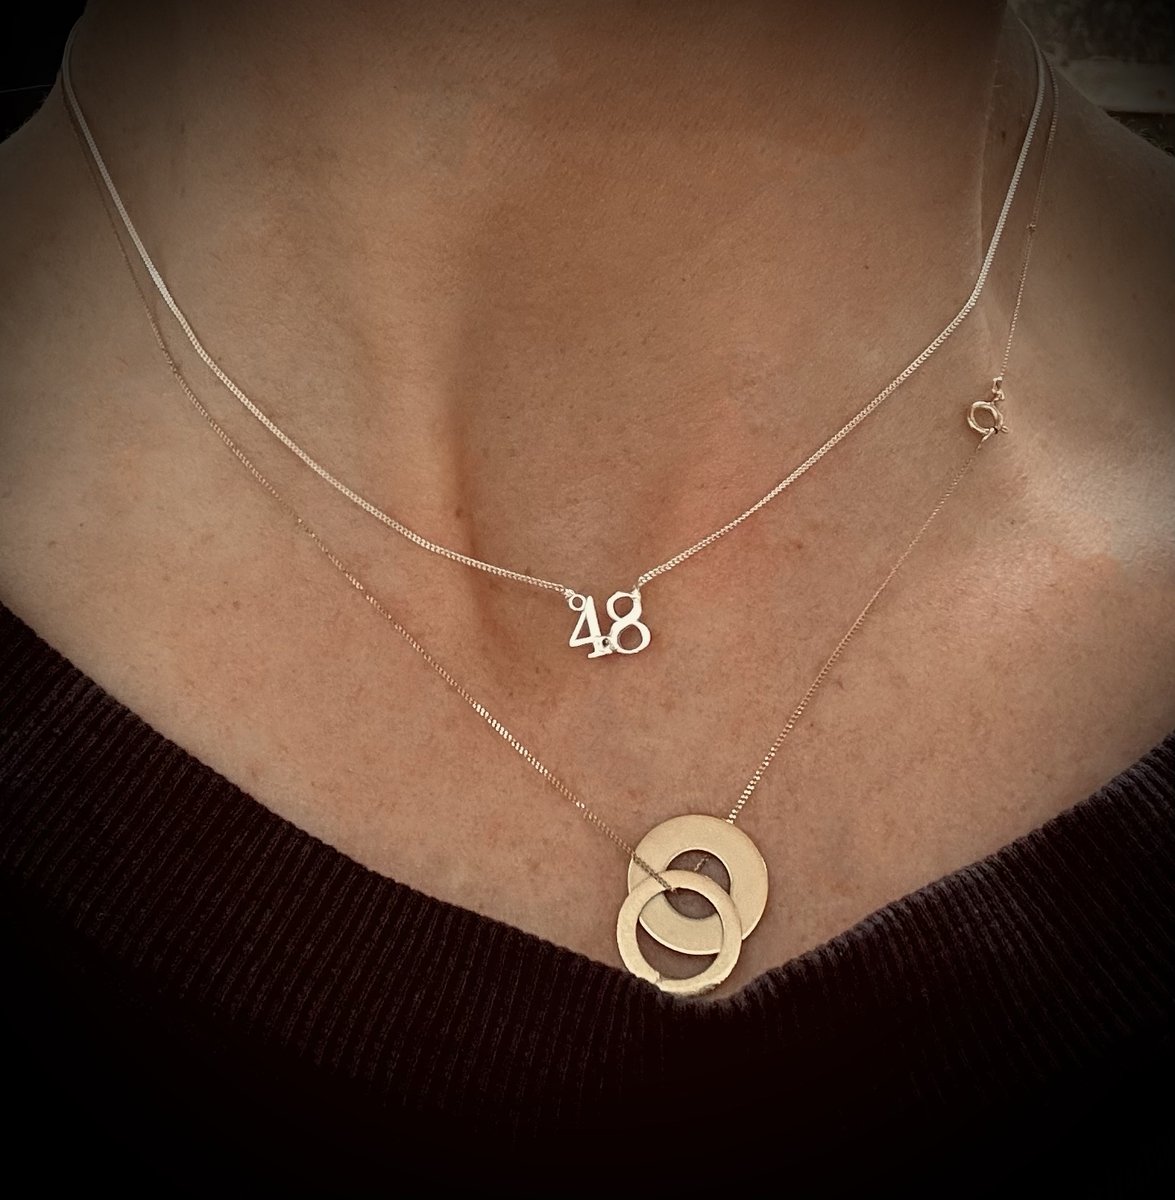 Personalising a piece of jewellery adds that extra touch to show someone how special they are. This super-cute personalised number necklace was commissioned to celebrate an incredible sporting achievement. 🤩👌🏑

#personalisedjewellery
#numbernecklace
#delicatenecklace